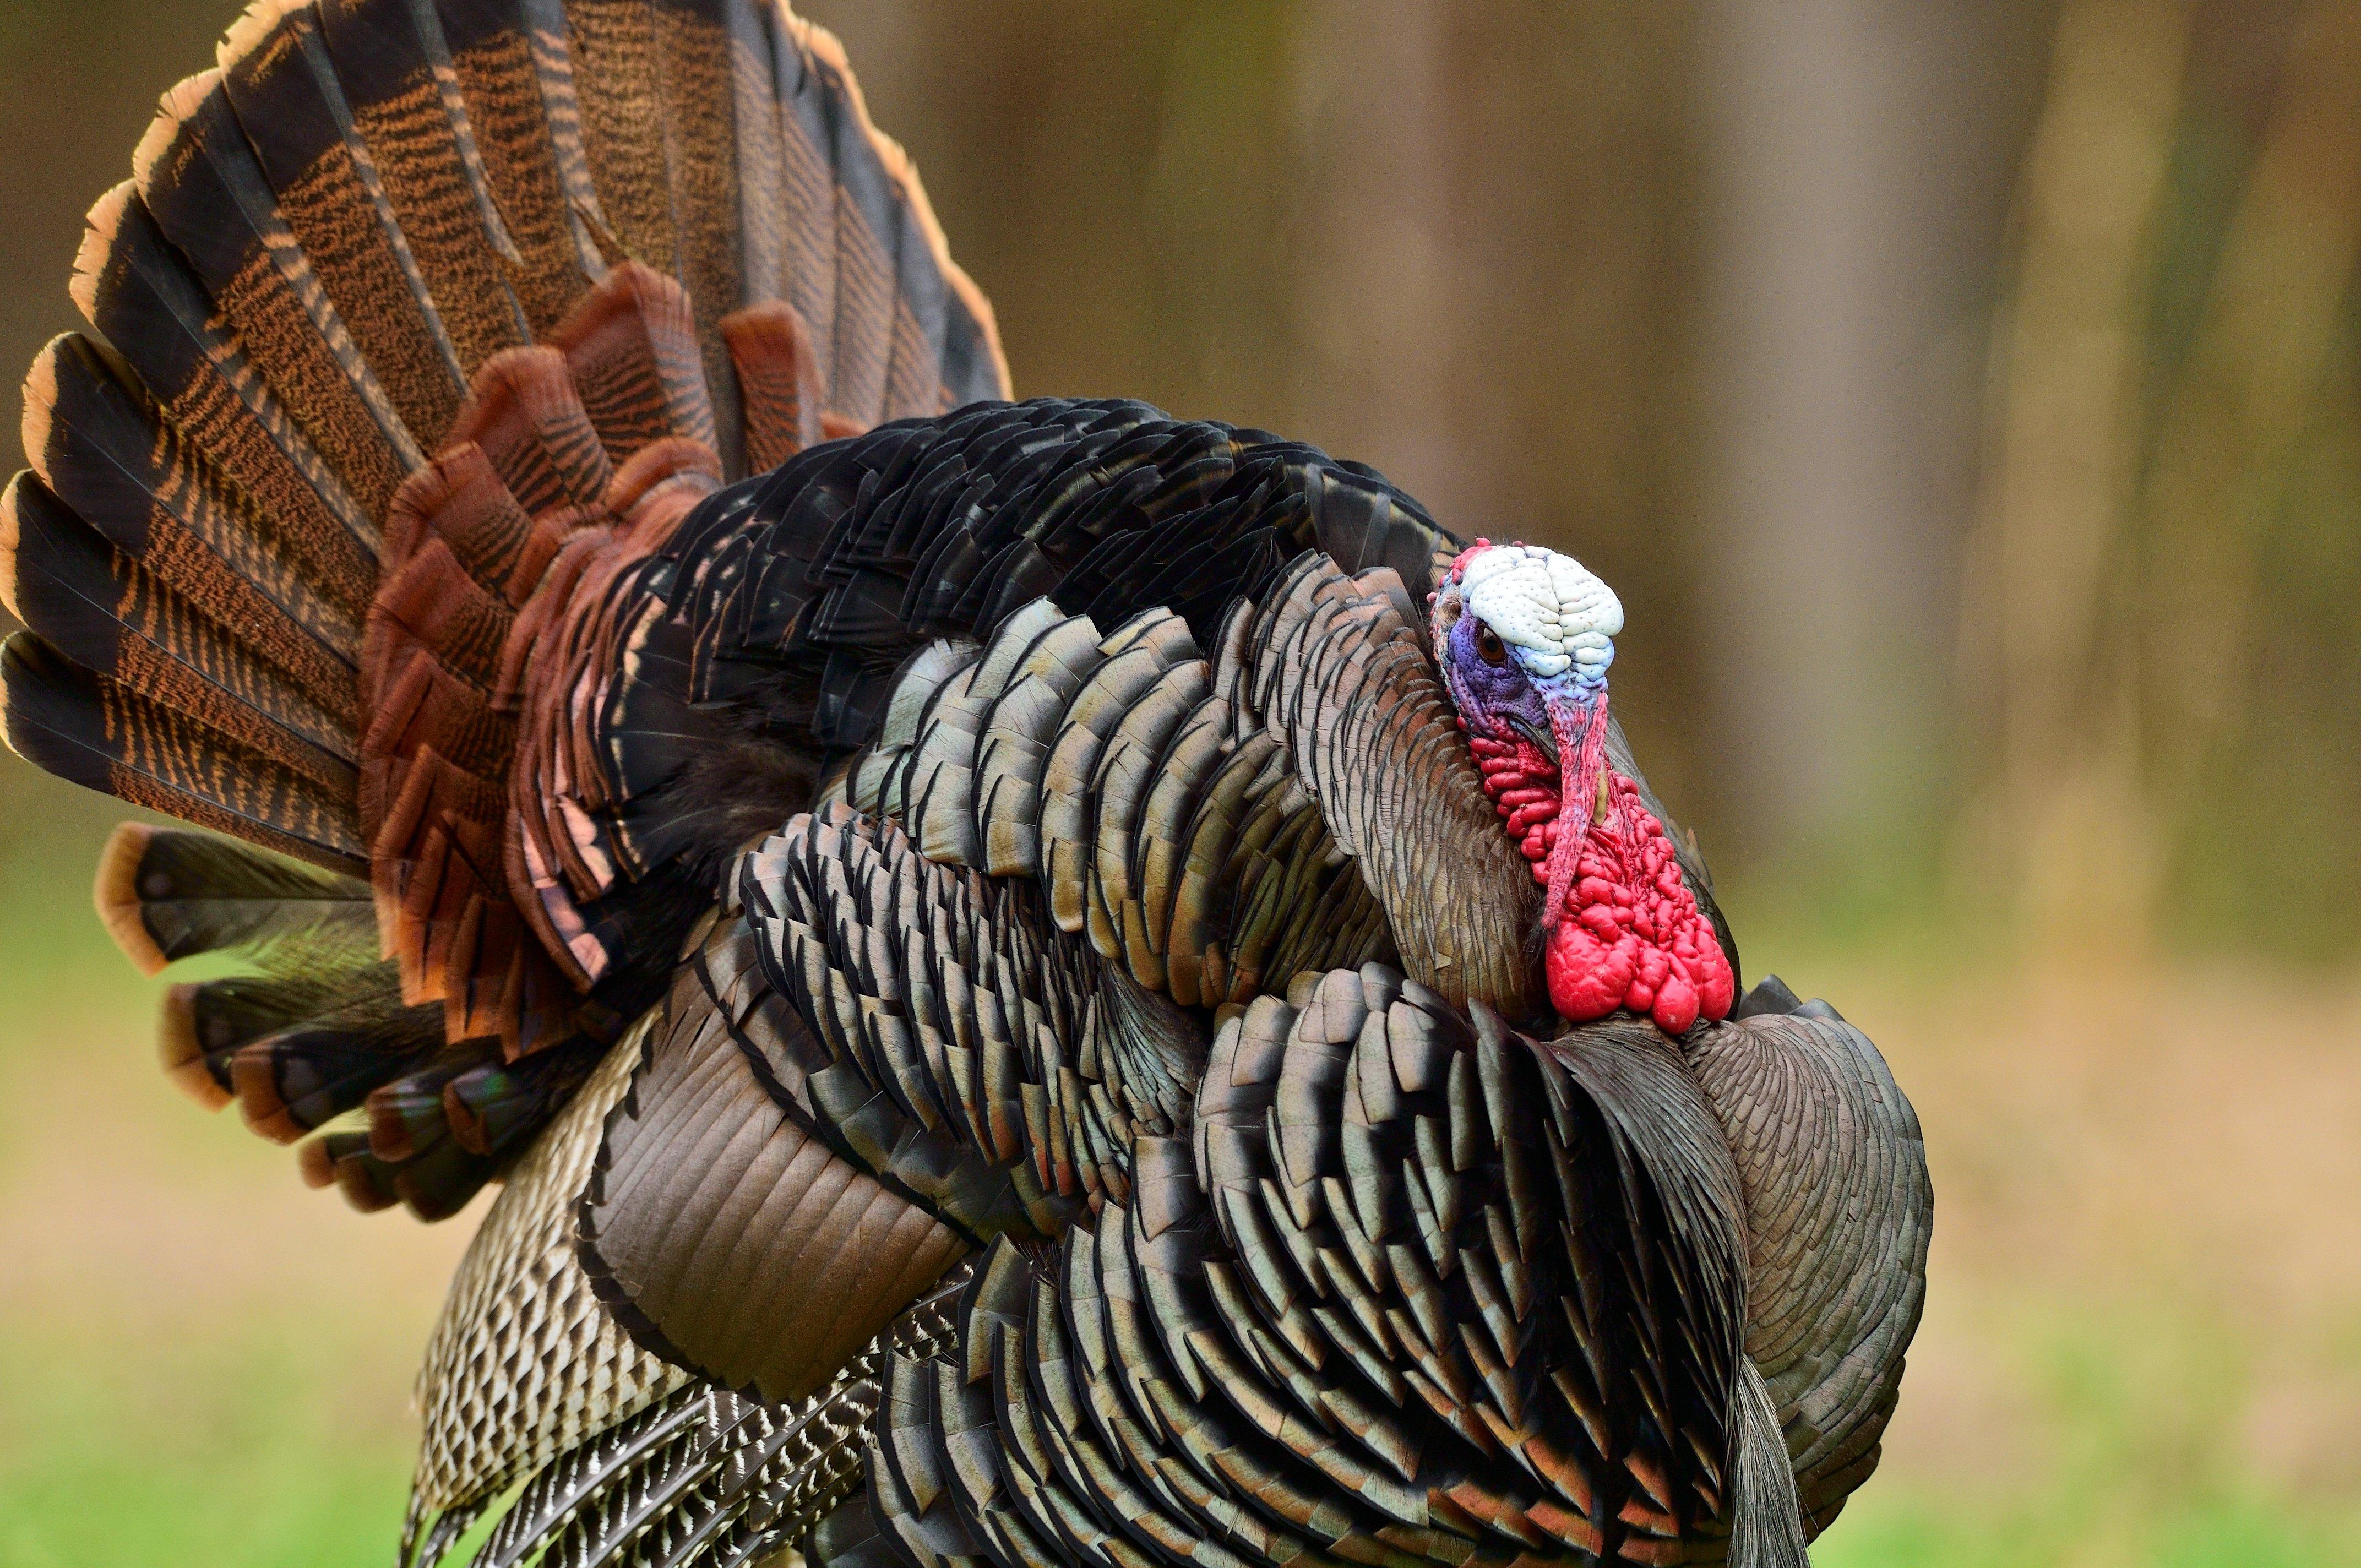 Turkey Hunting in Maryland. Image by Tes Randle Jolly